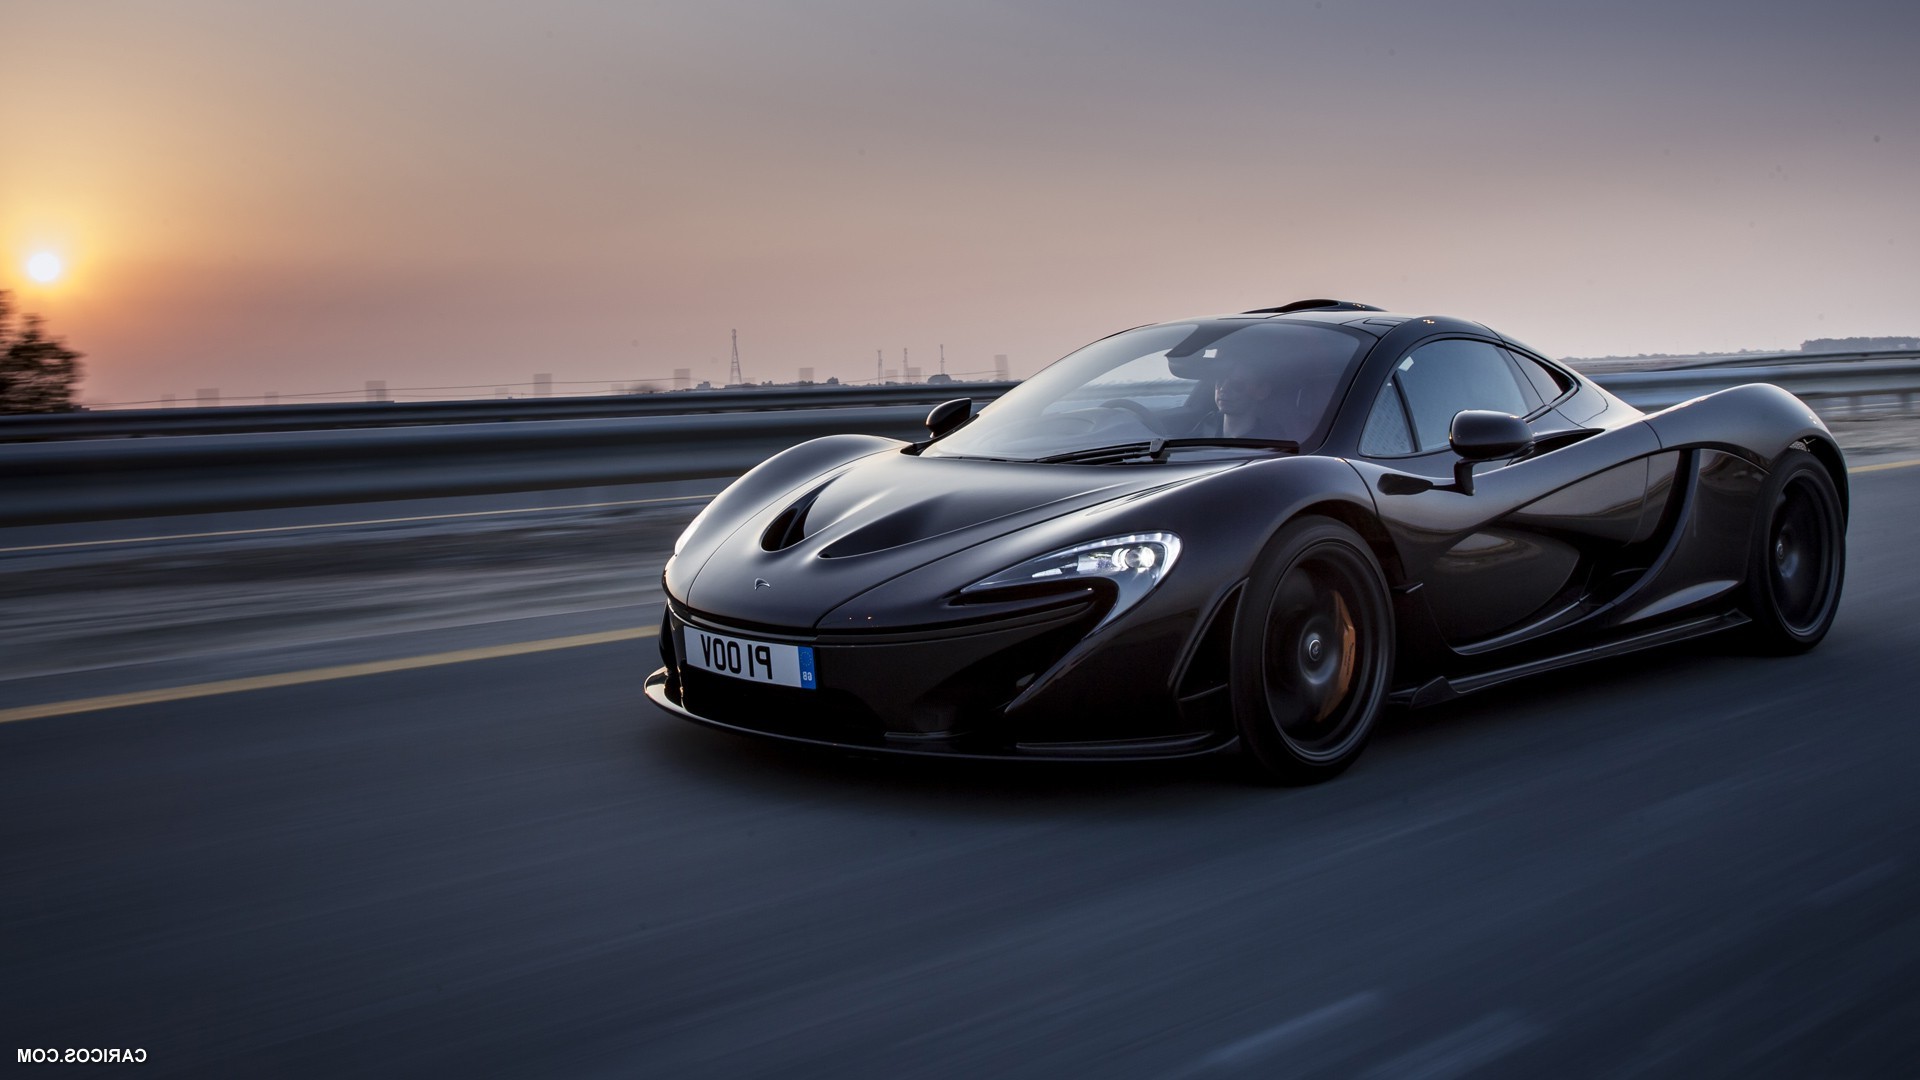 Mclaren P1 Supercar Hd Cars 4k Wallpapers Images Backgrounds Photos And Pictures